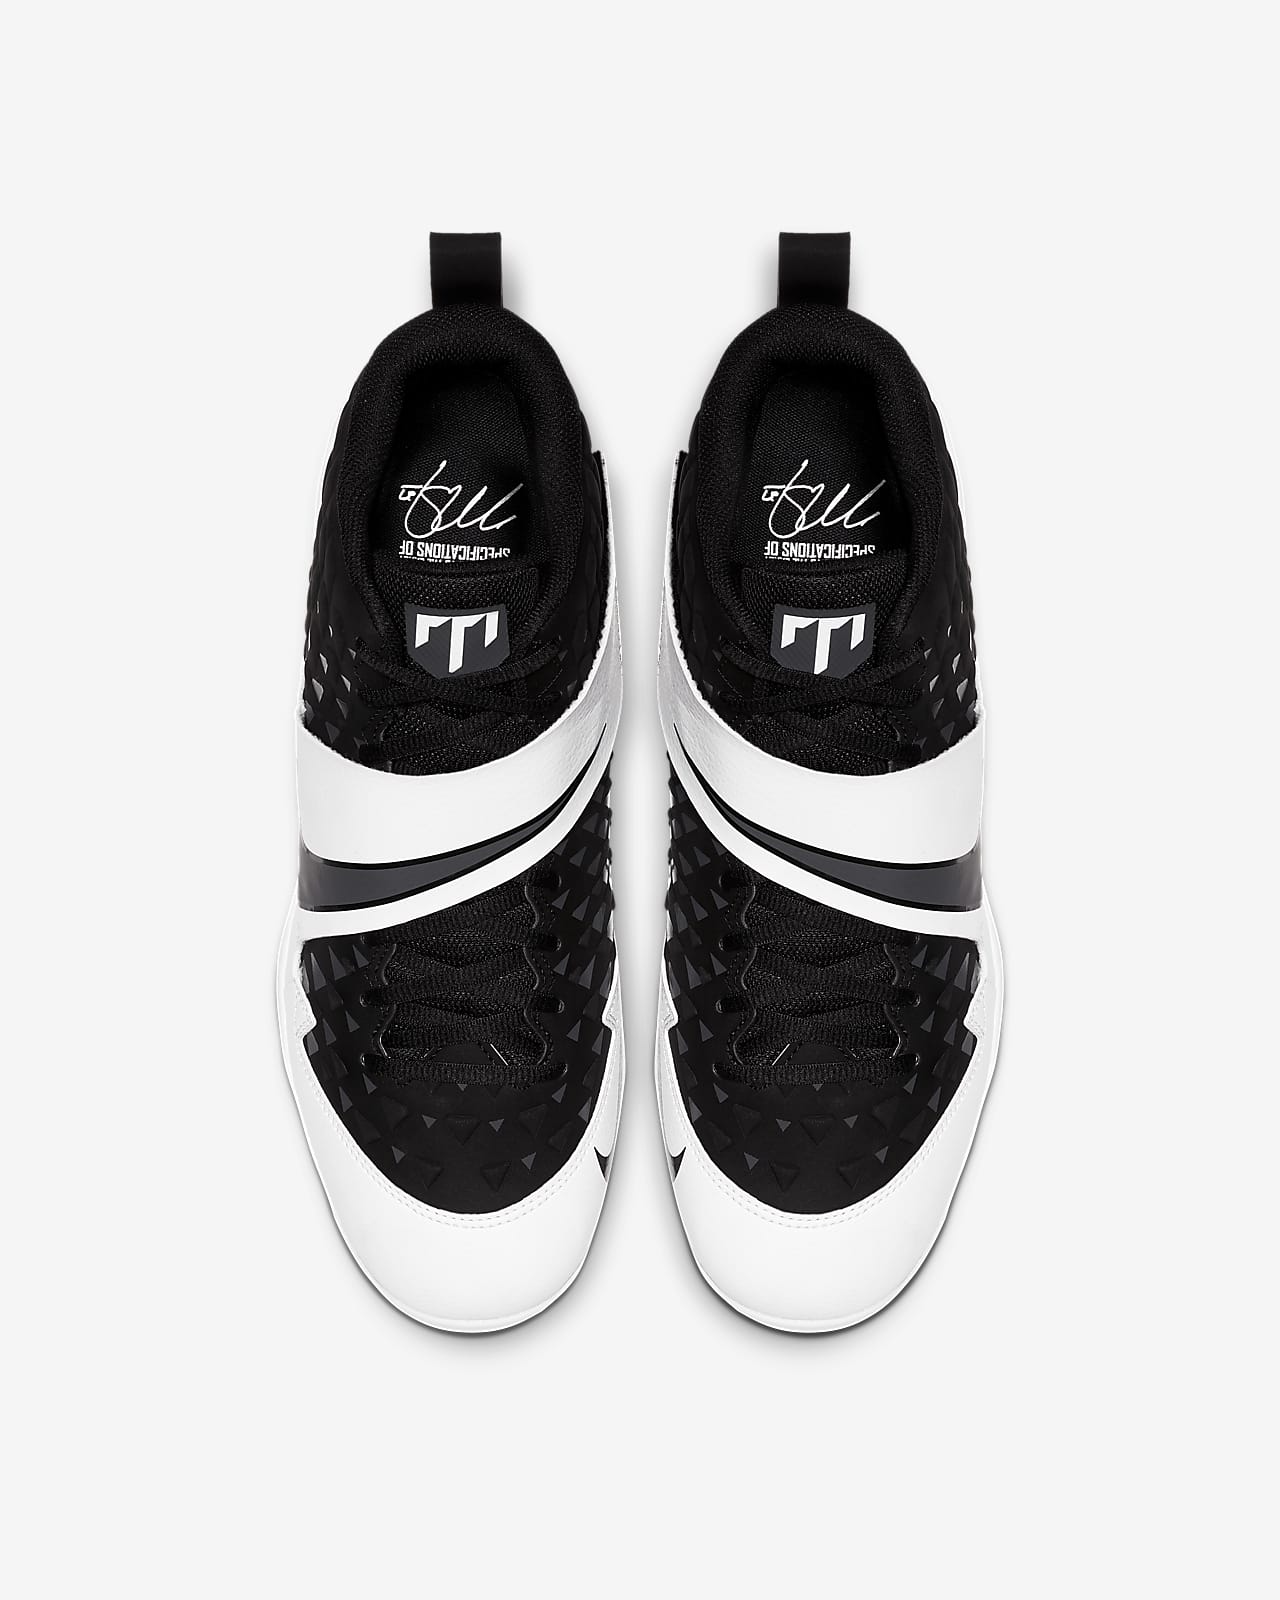 nike youth force trout 6 pro